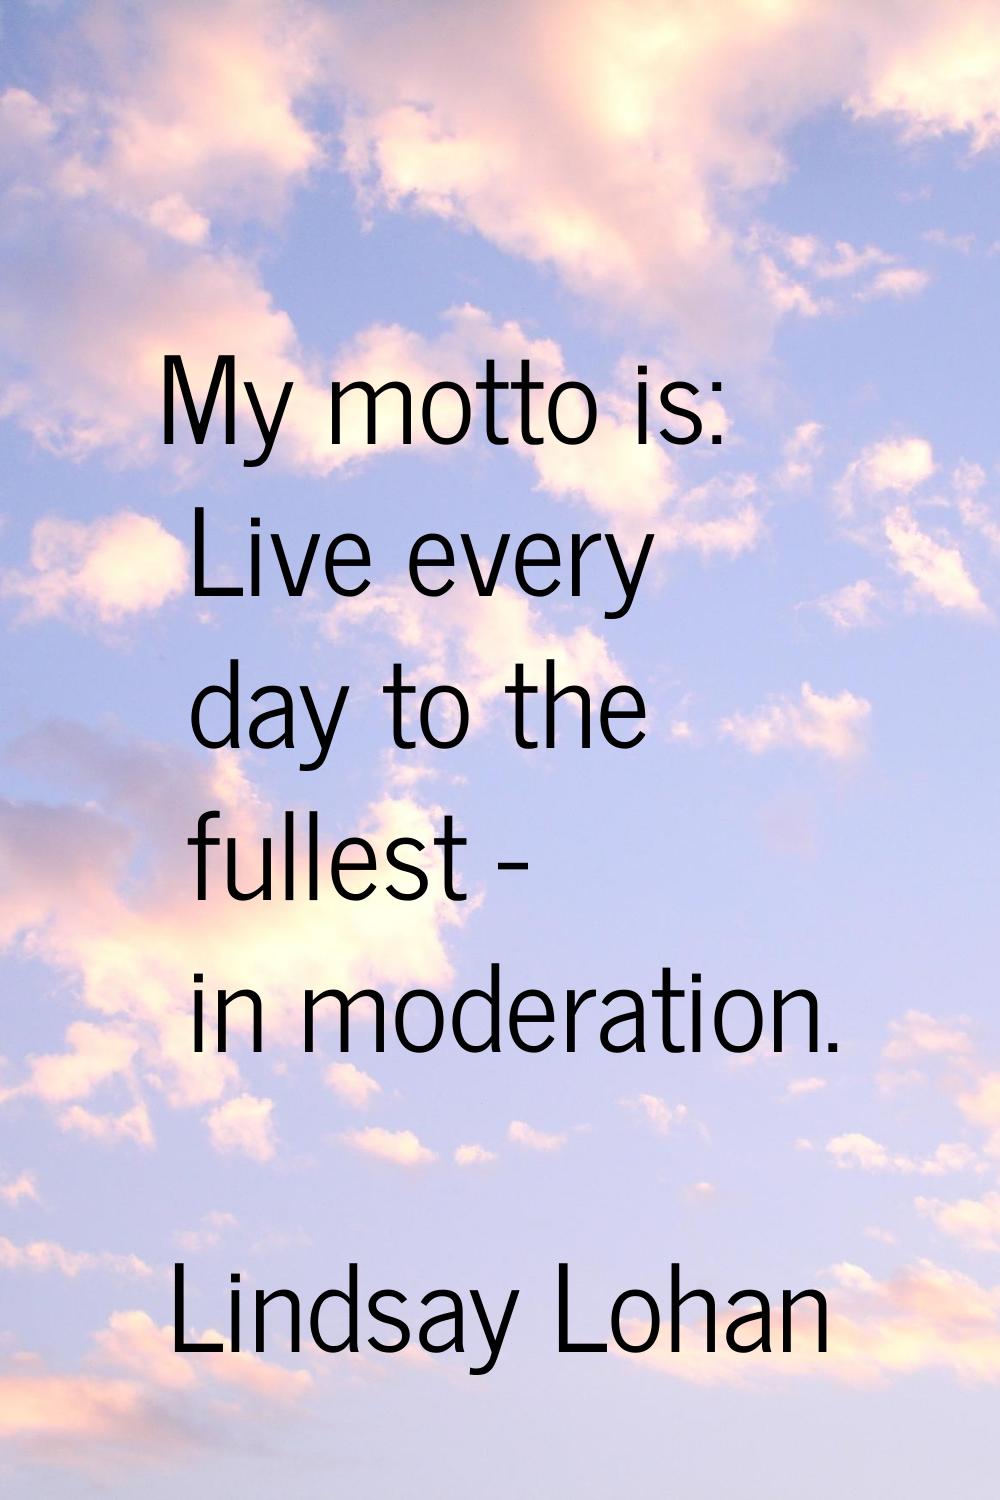 My motto is: Live every day to the fullest - in moderation.